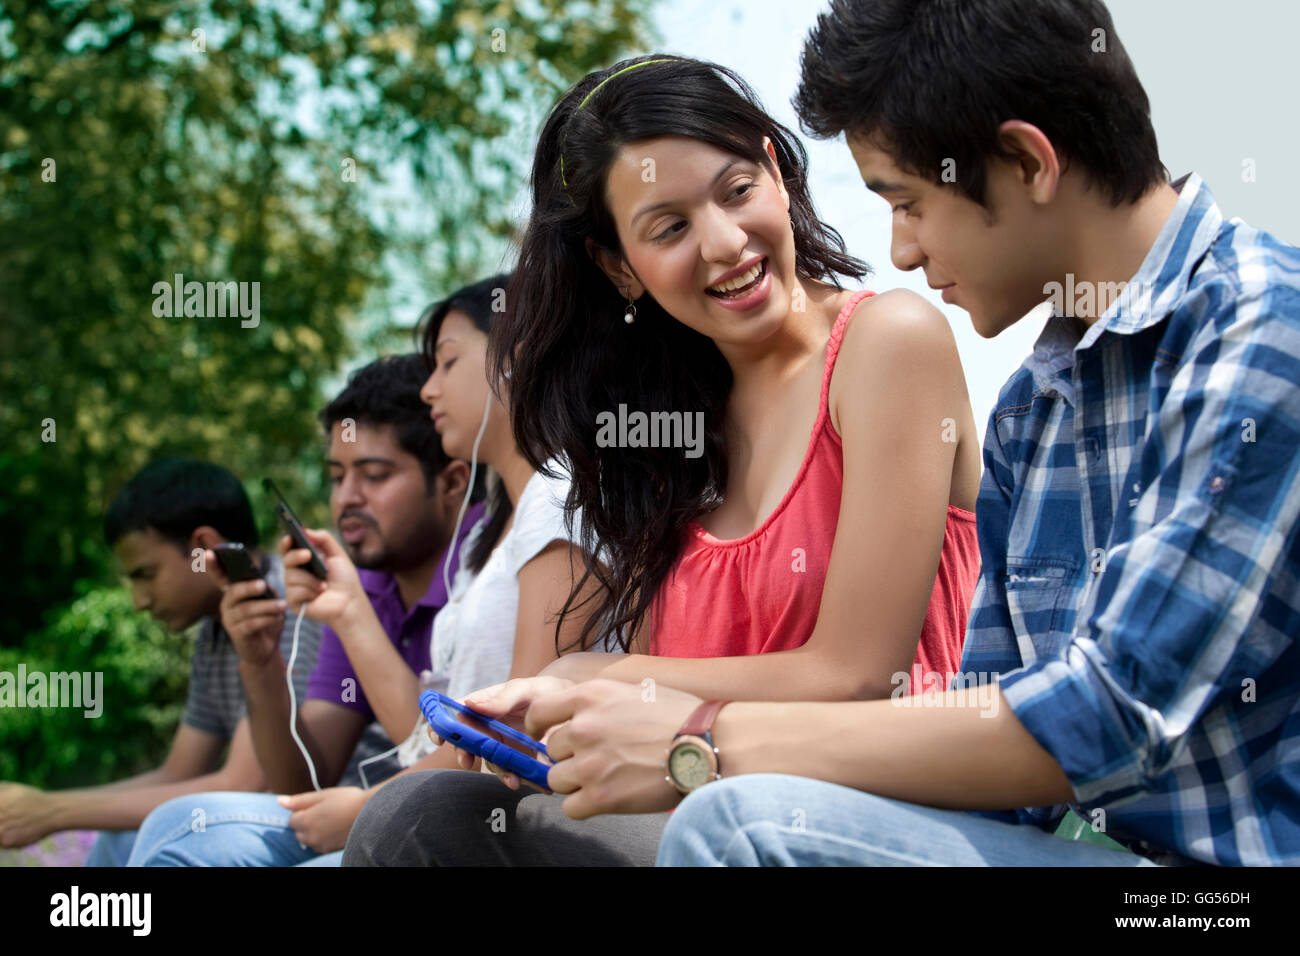 Friends using cell phone with people in the background Stock Photo